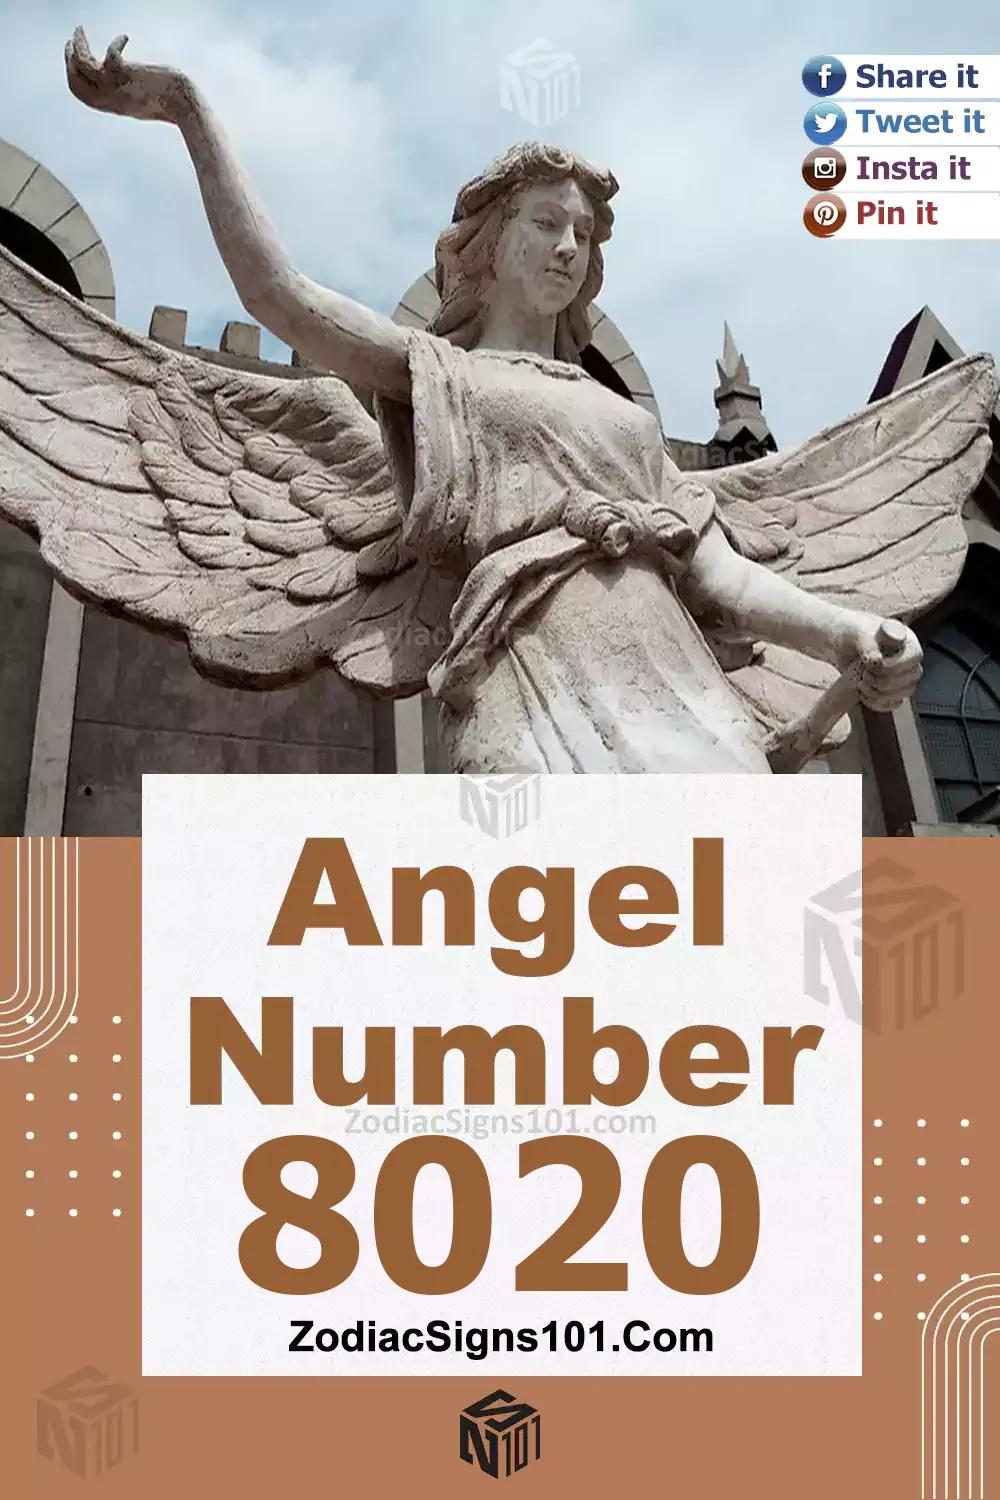 8020 Angel Number Meaning